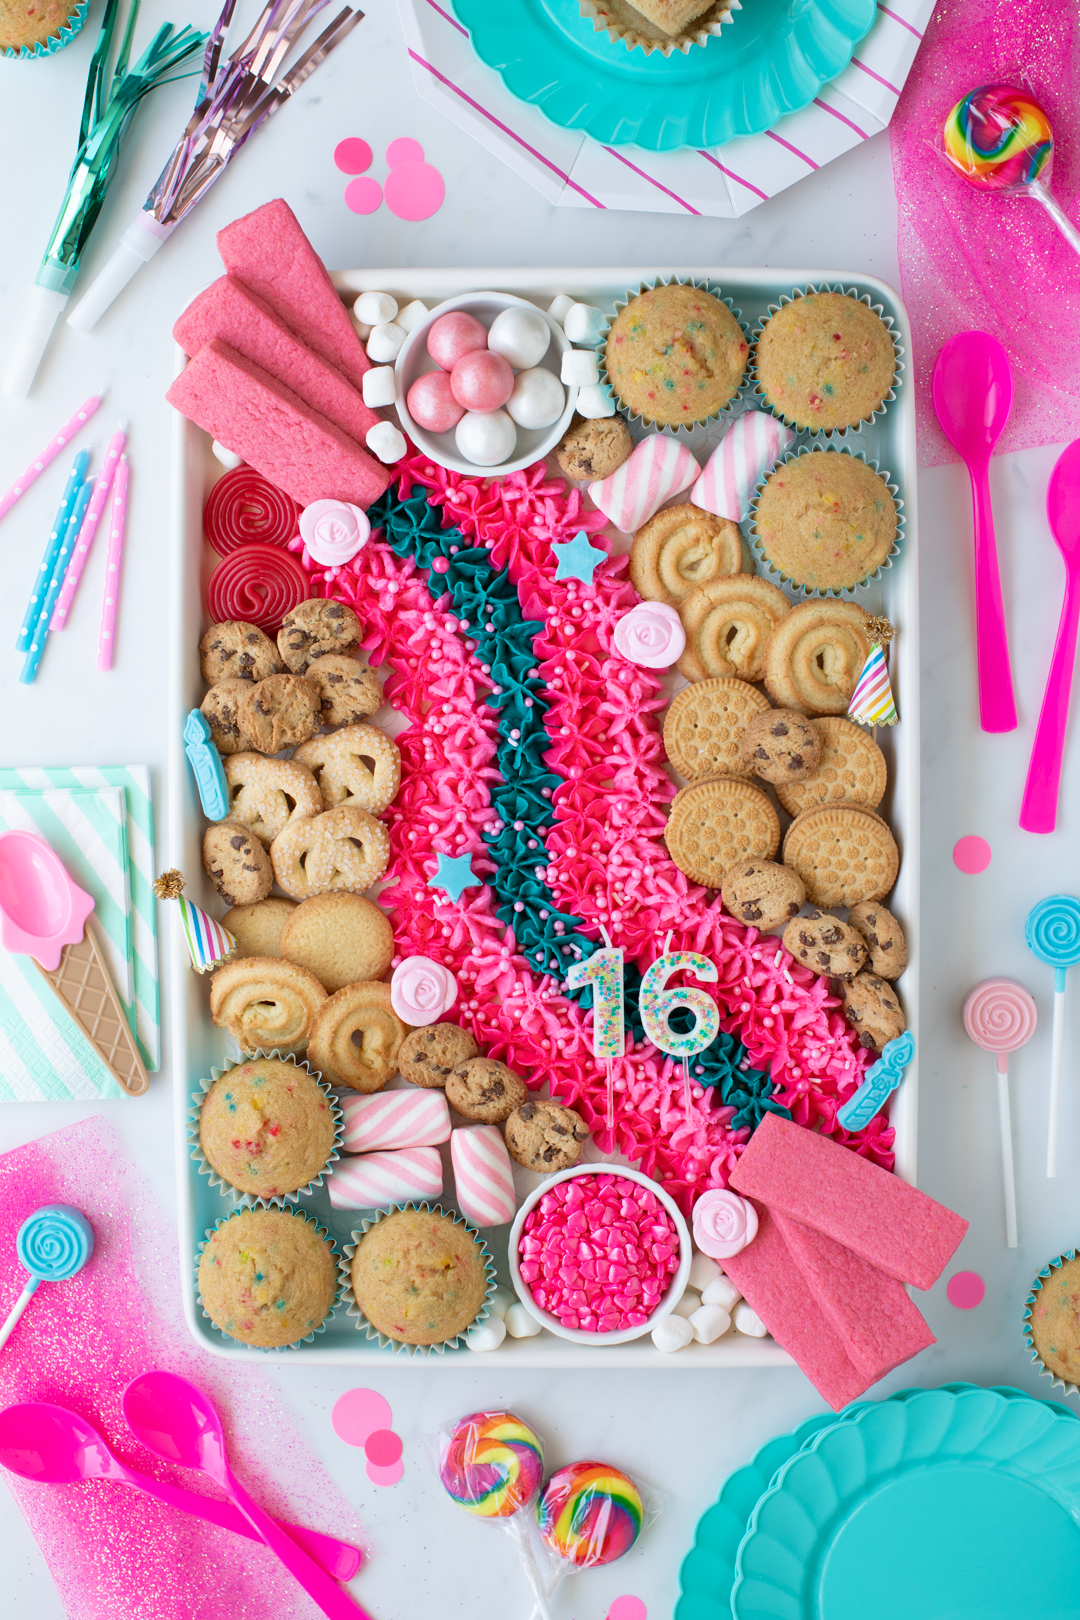 fun birthday buttercream board for the perfect birthday cake alternative. fun sleepover food. great for teen parties.